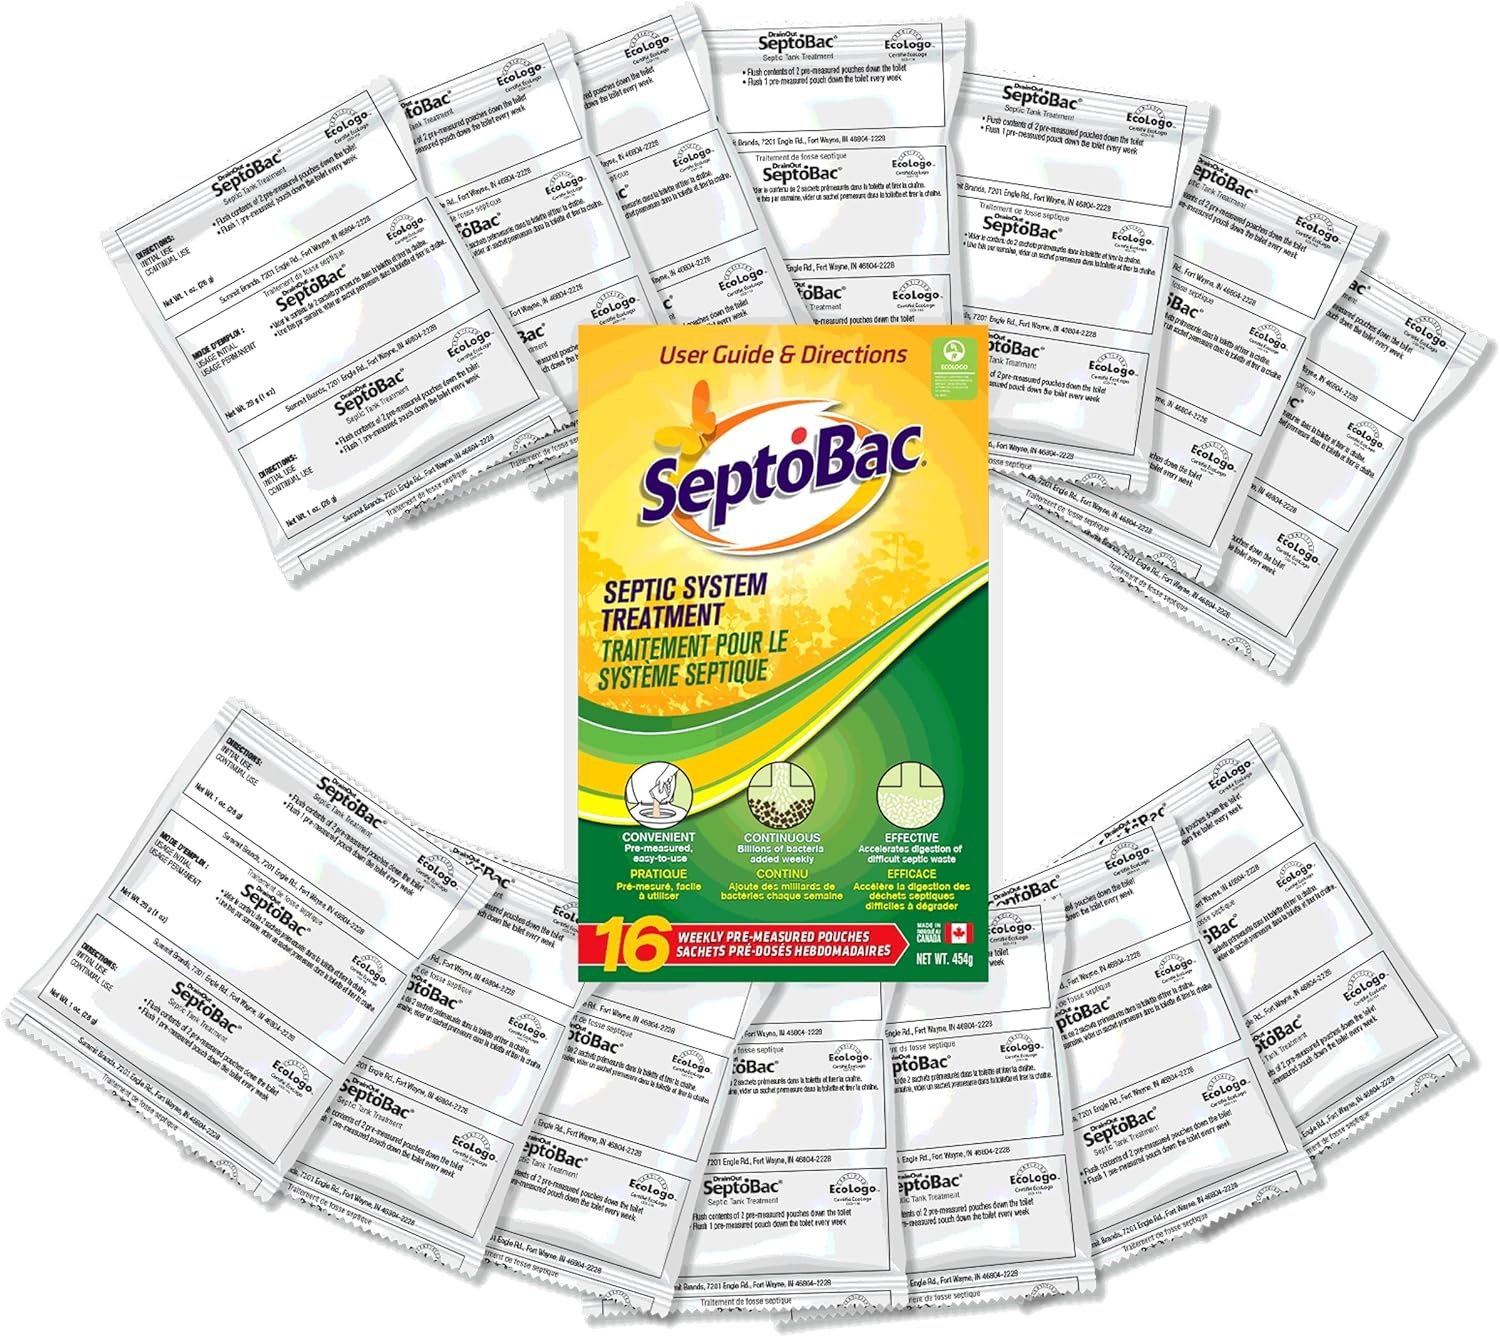 SeptoBac Septic System Treatment Maintenance, Convenient Pre-Measured Weekly Pouches for Sewage Waste Tank for Homes, RVs, Boats, Pack of 16